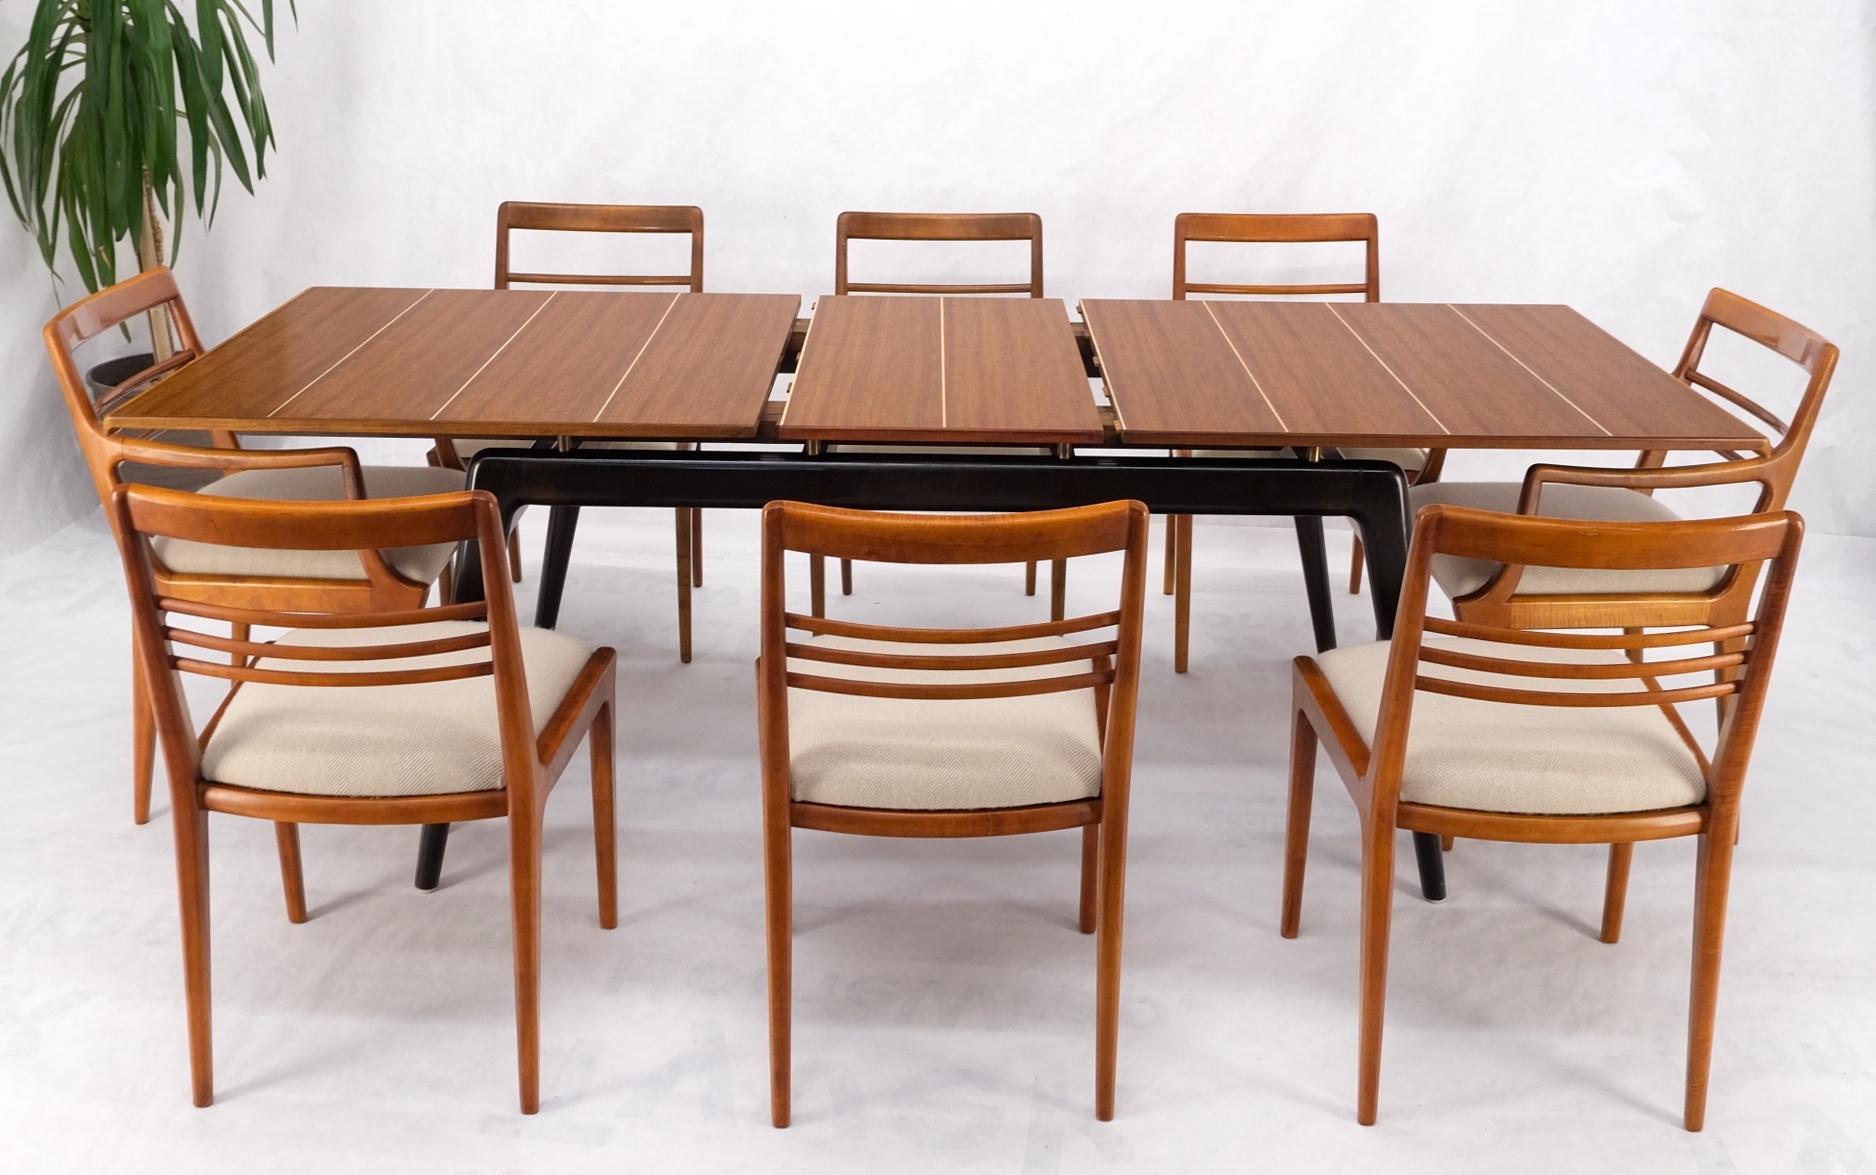 Italian Mid-Century Modern Dining Table 8 Chairs Set New Linen Upholstery Seats For Sale 9